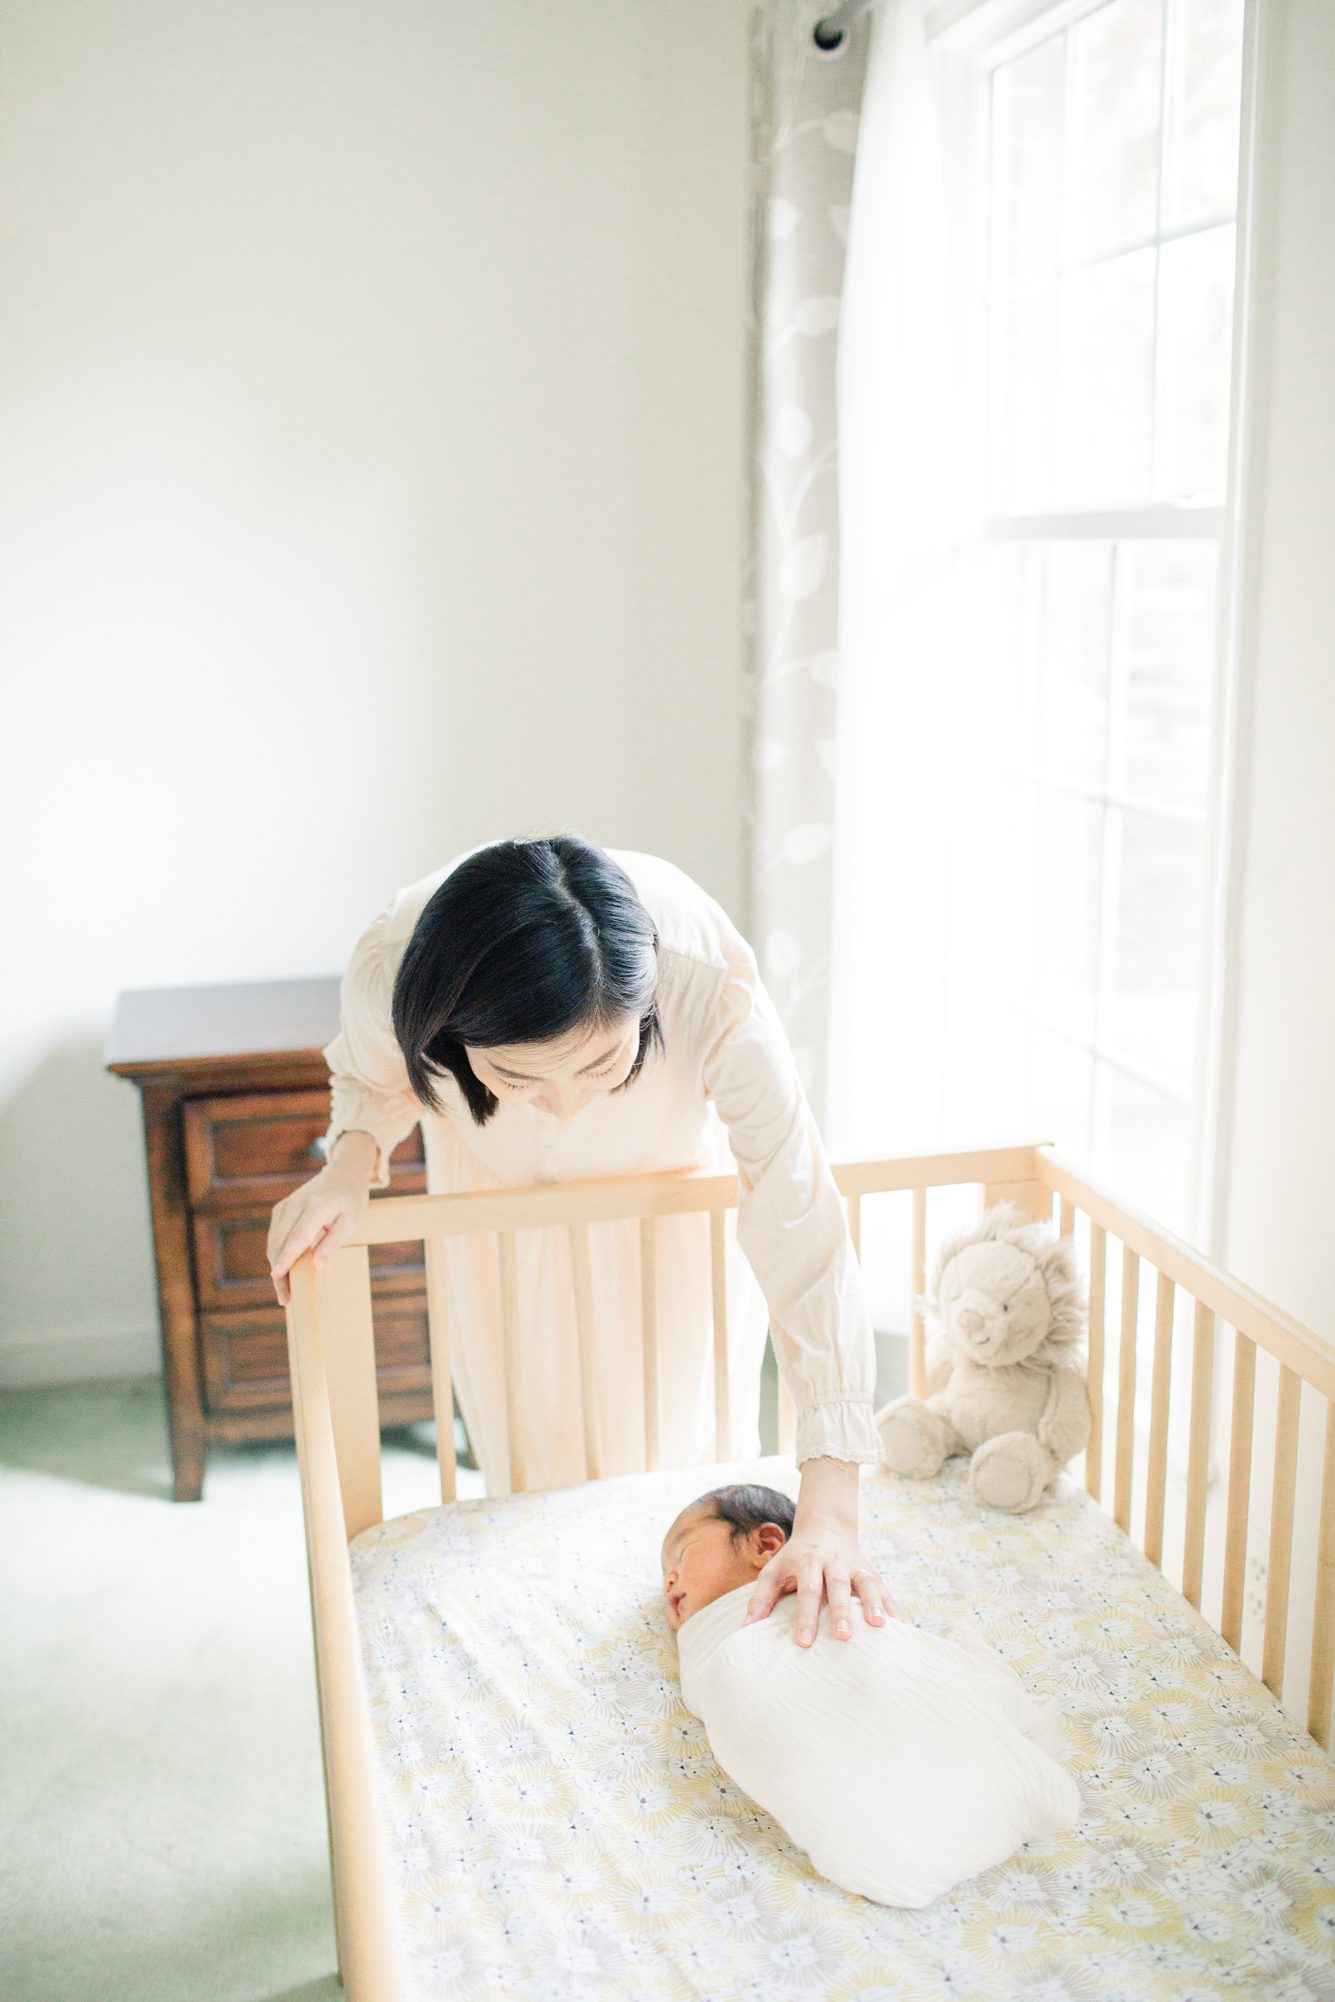 Mom reaching into crib to soothe baby during newborn photo shoot in Bethesda, MD. Photo by LRG Portraits.